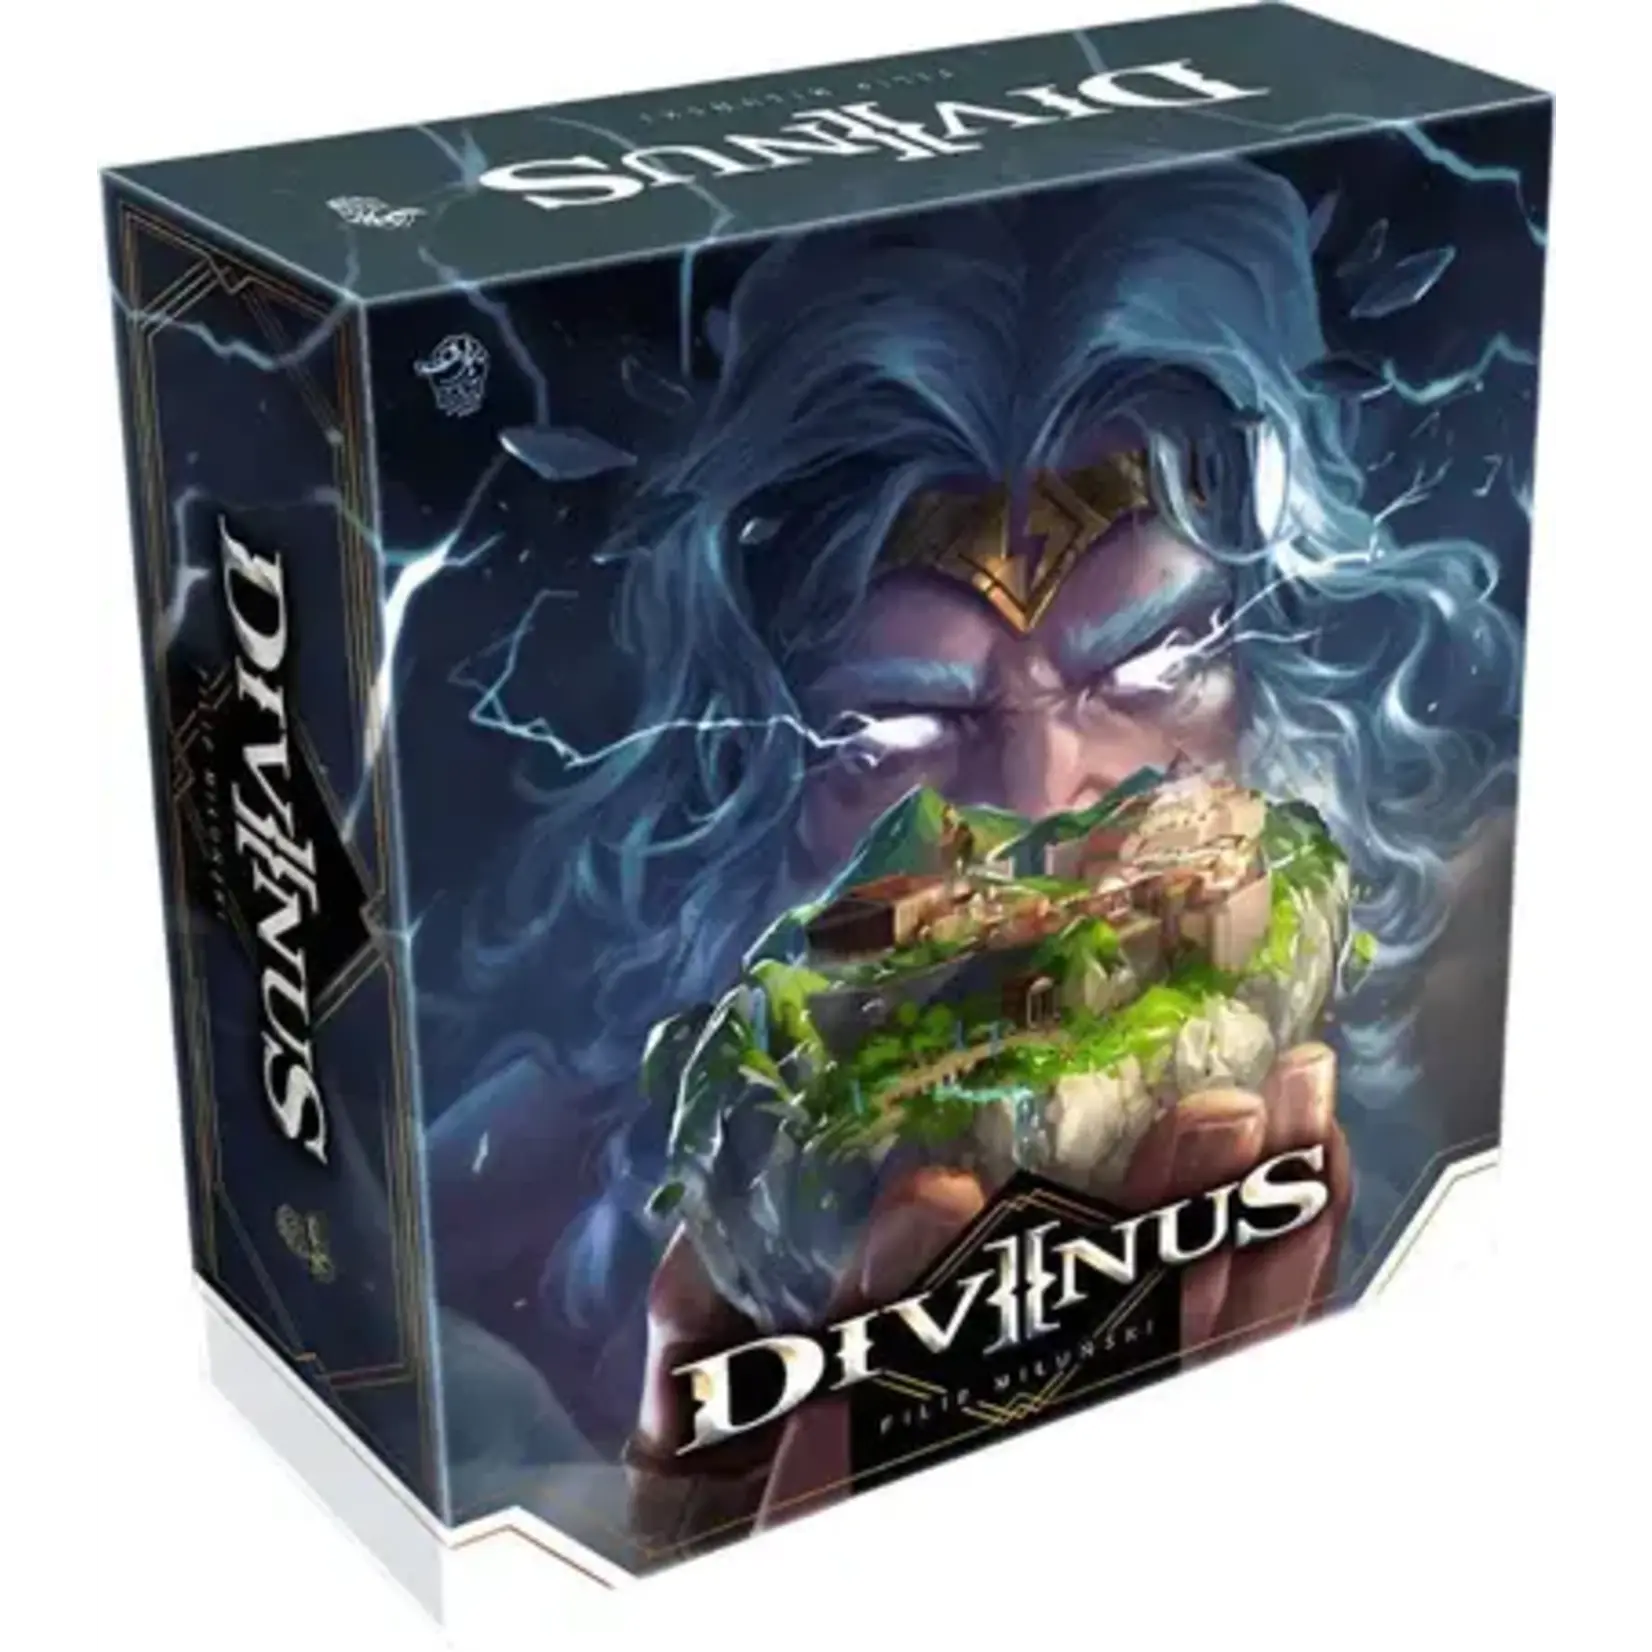 Lucky Duck Games Divinus Godly Pledge (Includes Yggdrasil Exp)